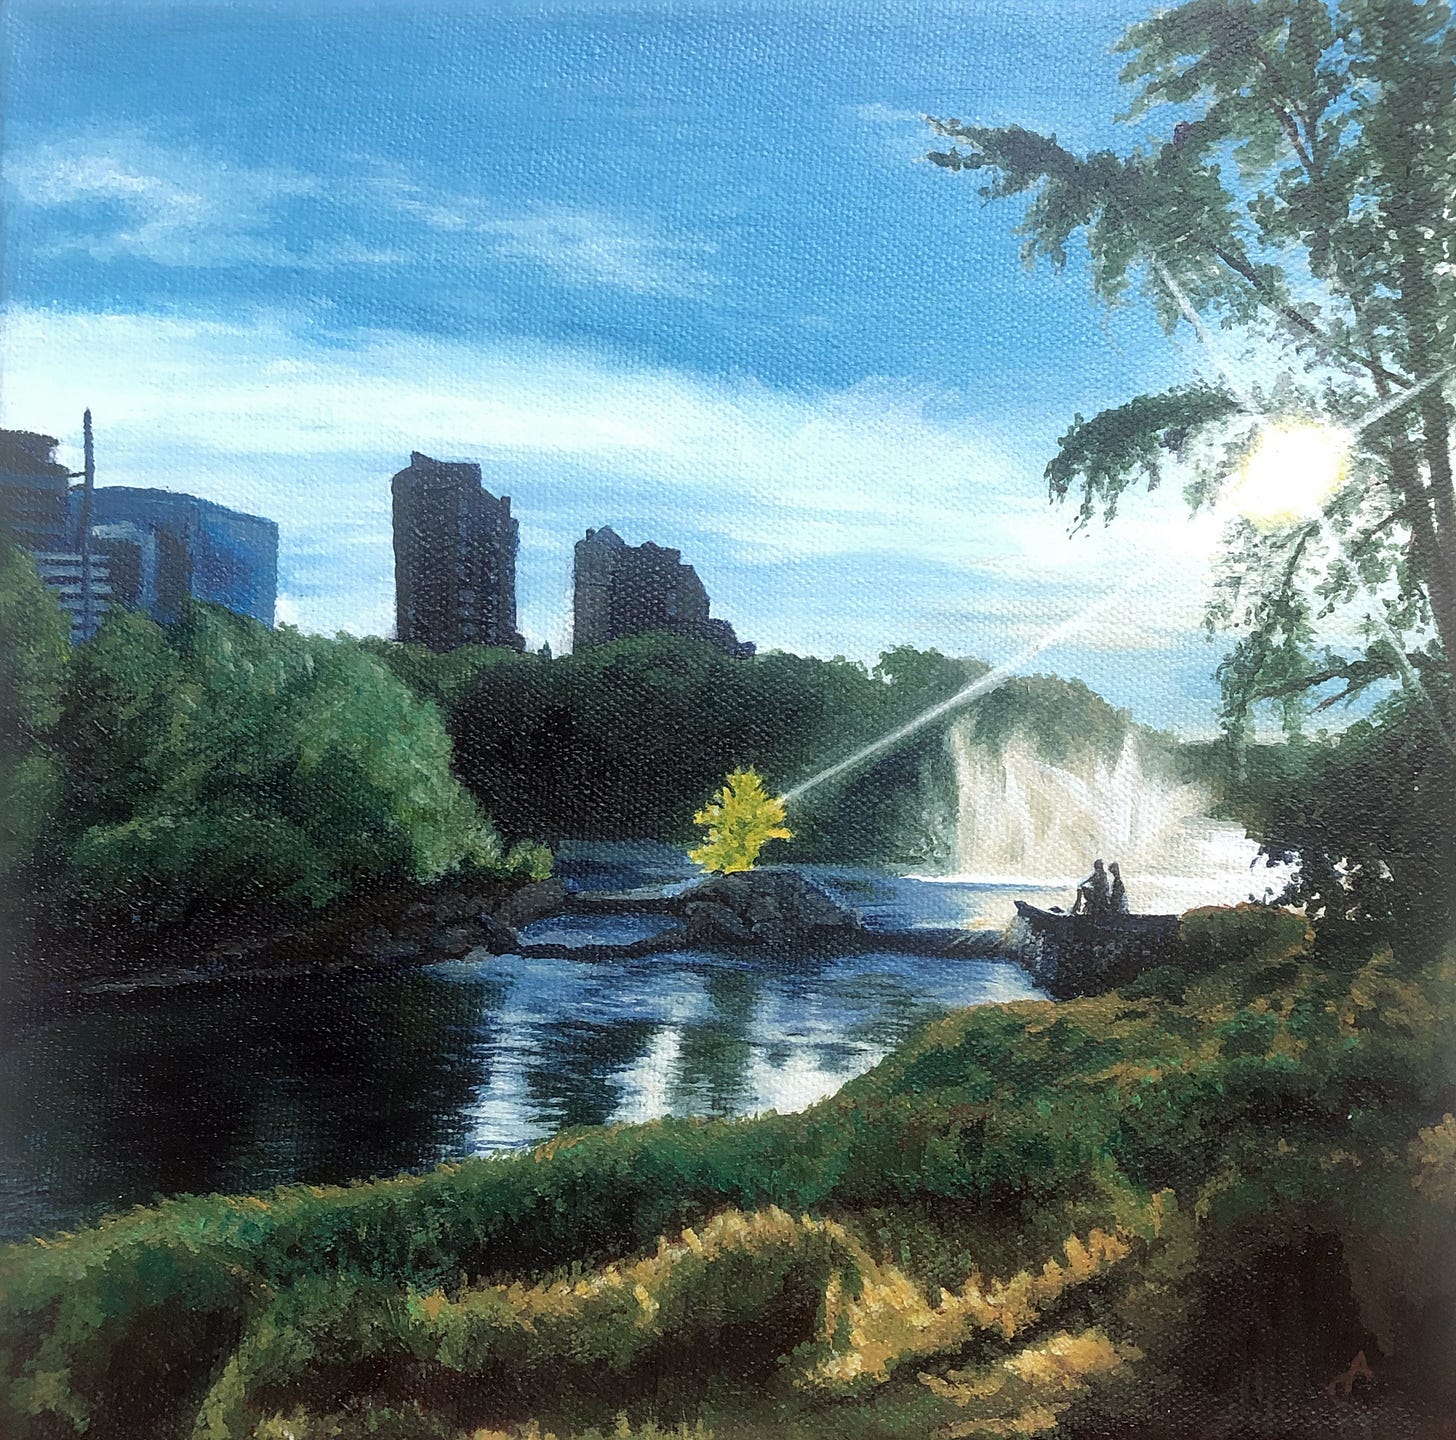 Painting of a summery scene with two figures in silhouette seated on the bank of a river. Where the river broadens behind them there is a larger fountain spraying arcs of water. They are surrounded with the park's greenery and the tops of skyscrapers poke through the trees in the background. A sunbeam illuminates a small tree with yellow leaves perched on a rock in the middle of the river.